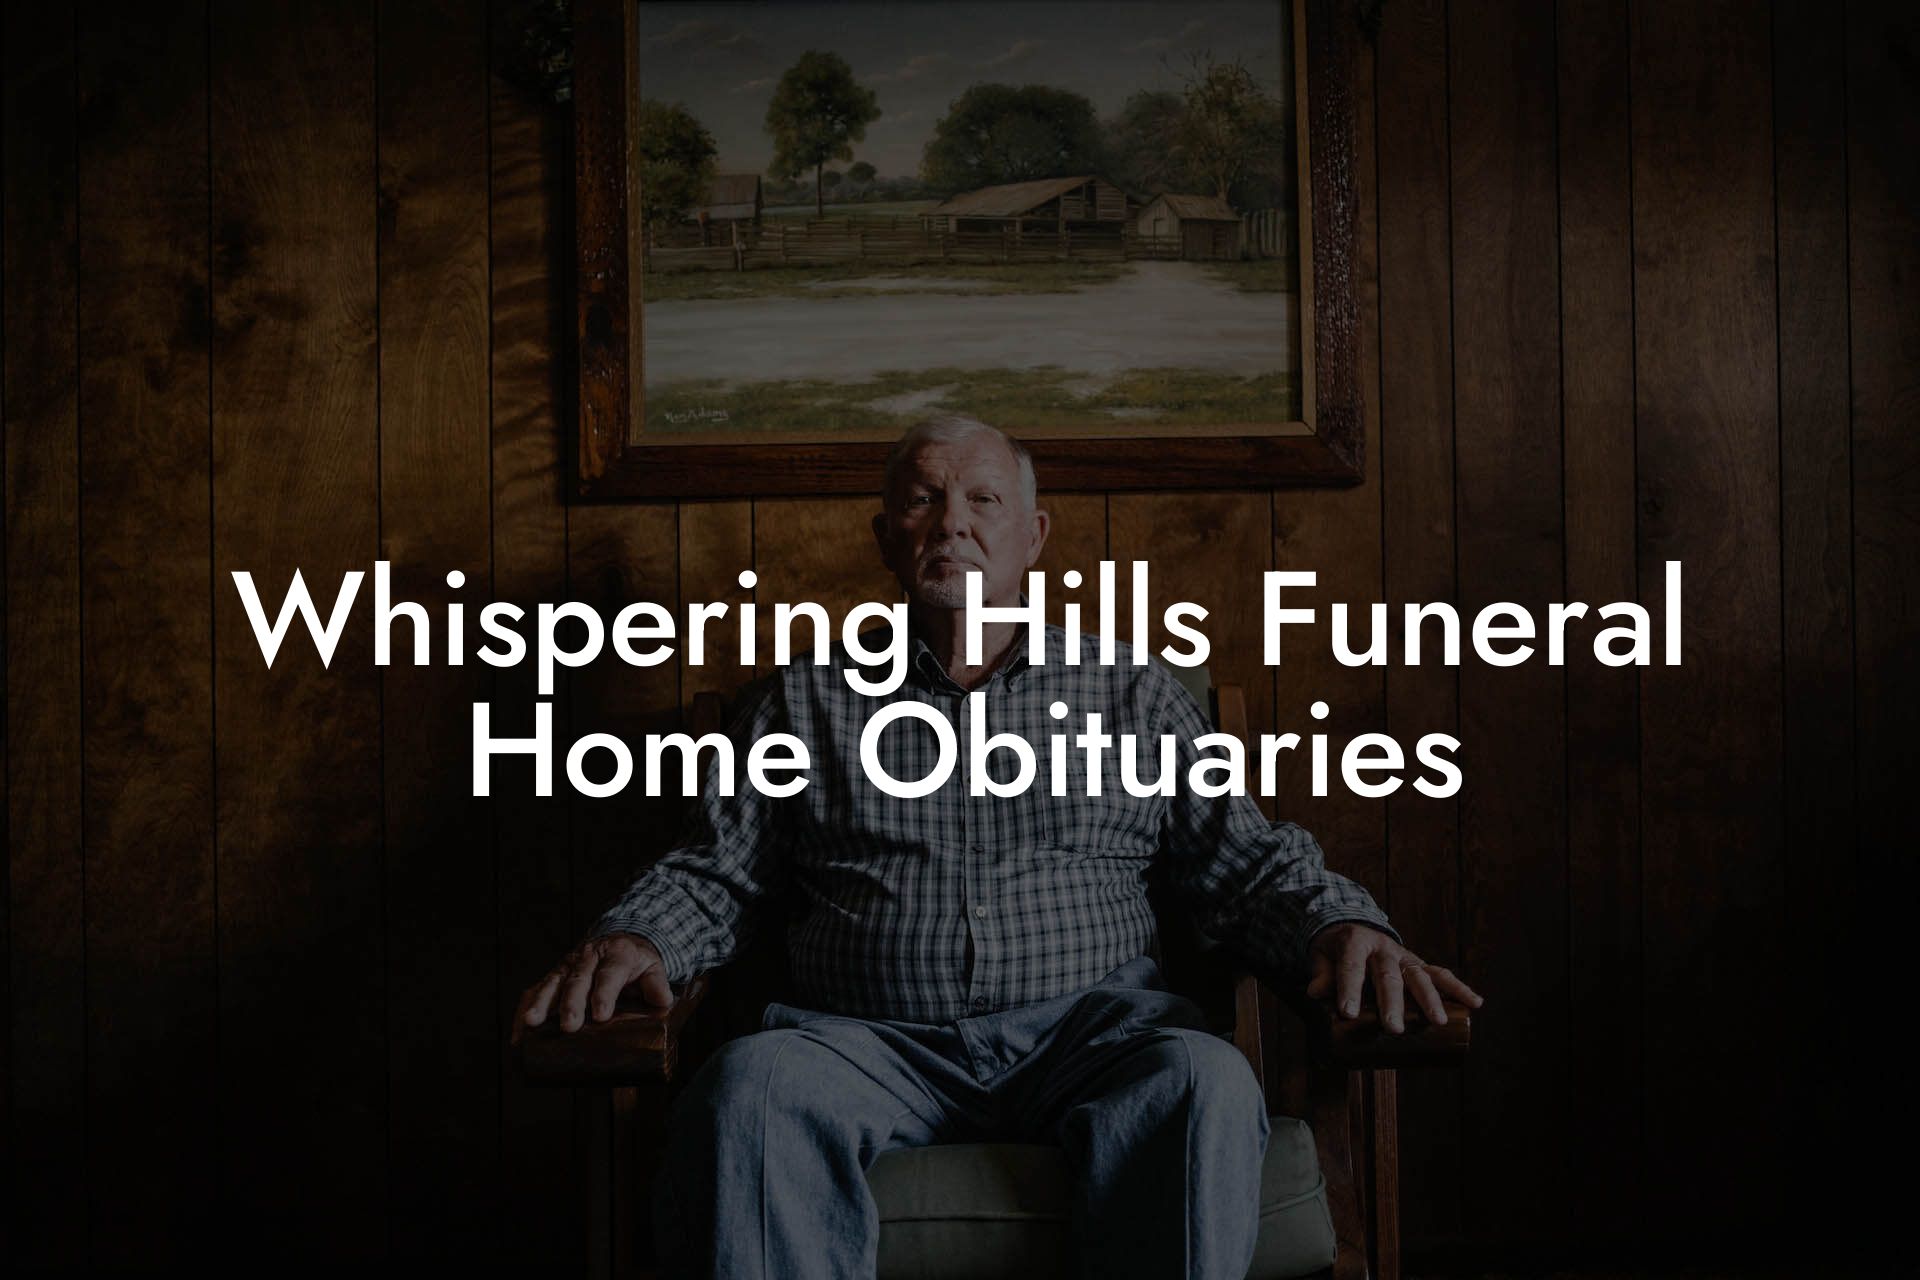 Whispering Hills Funeral Home Obituaries